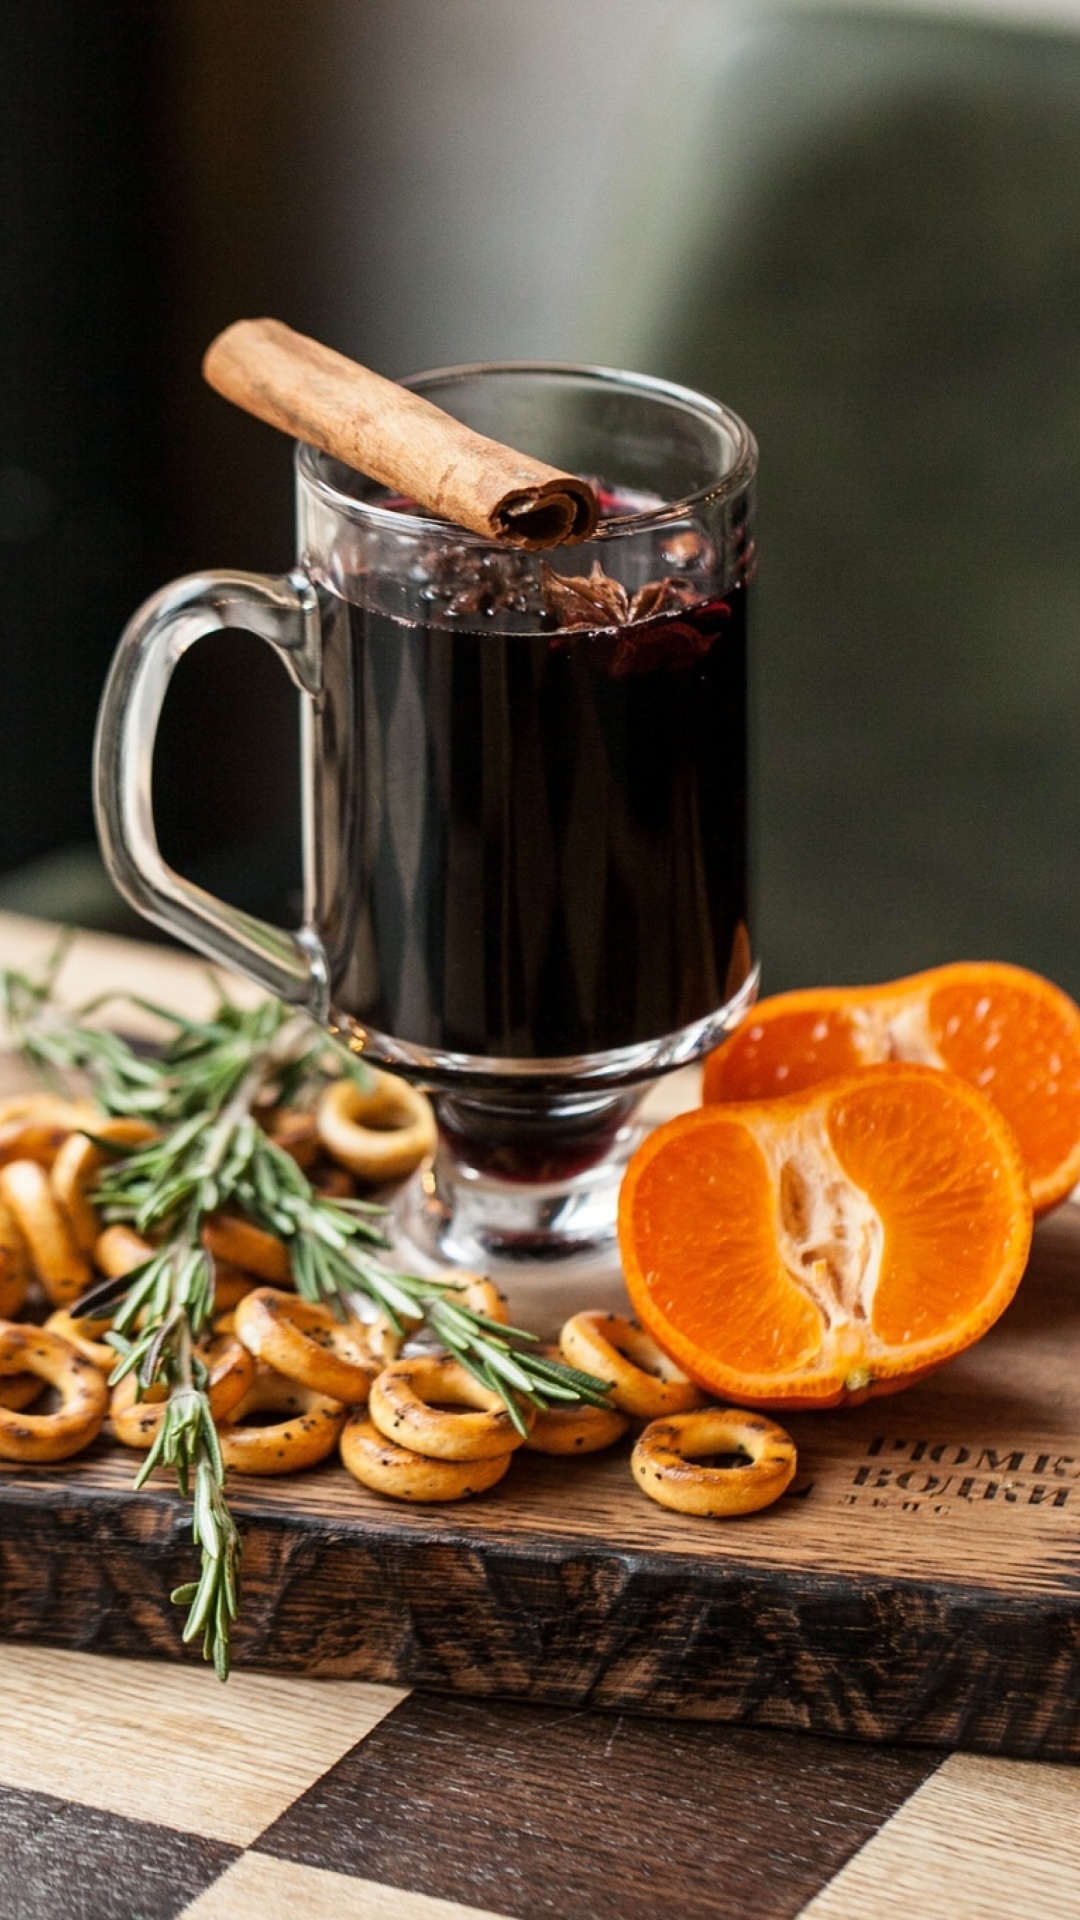 Hot Mulled Wine wallpaper 1080x1920